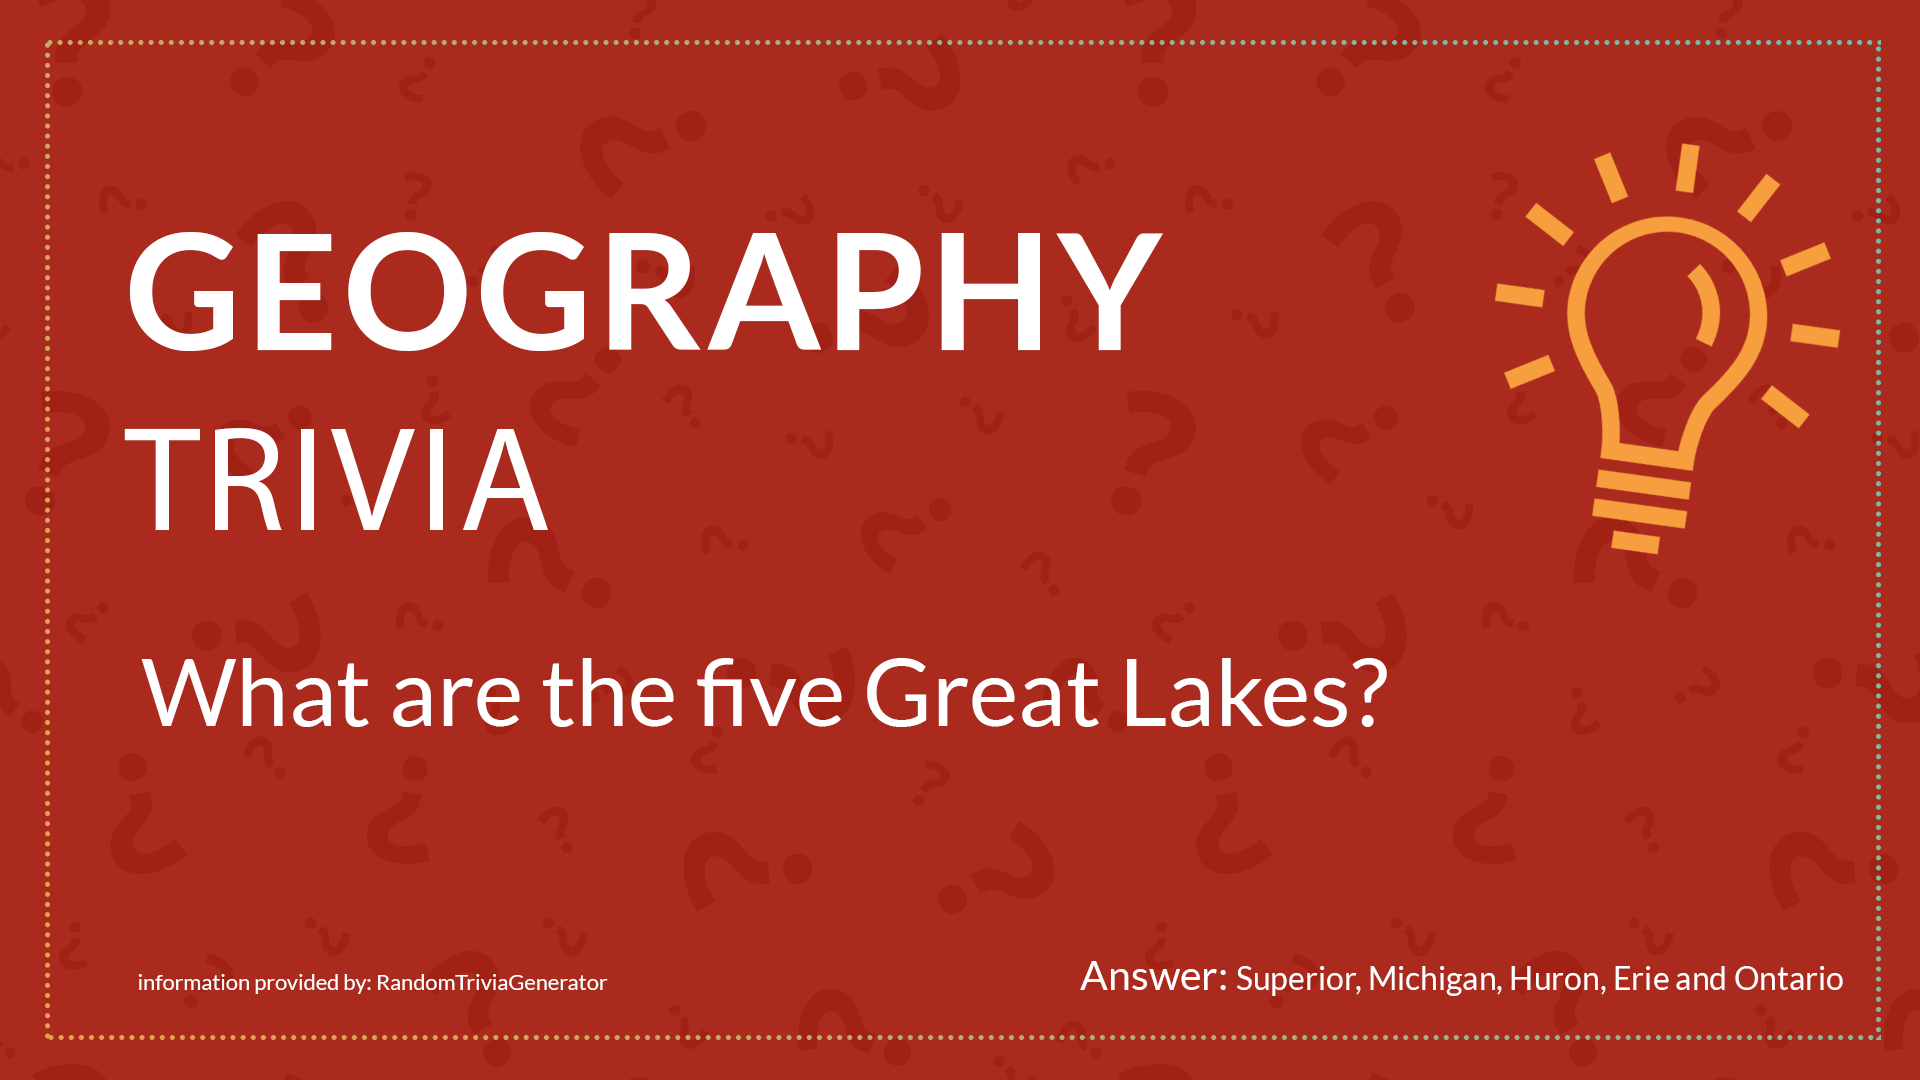 Red and yellow geography trivia asking about the Great Lakes for digital signage